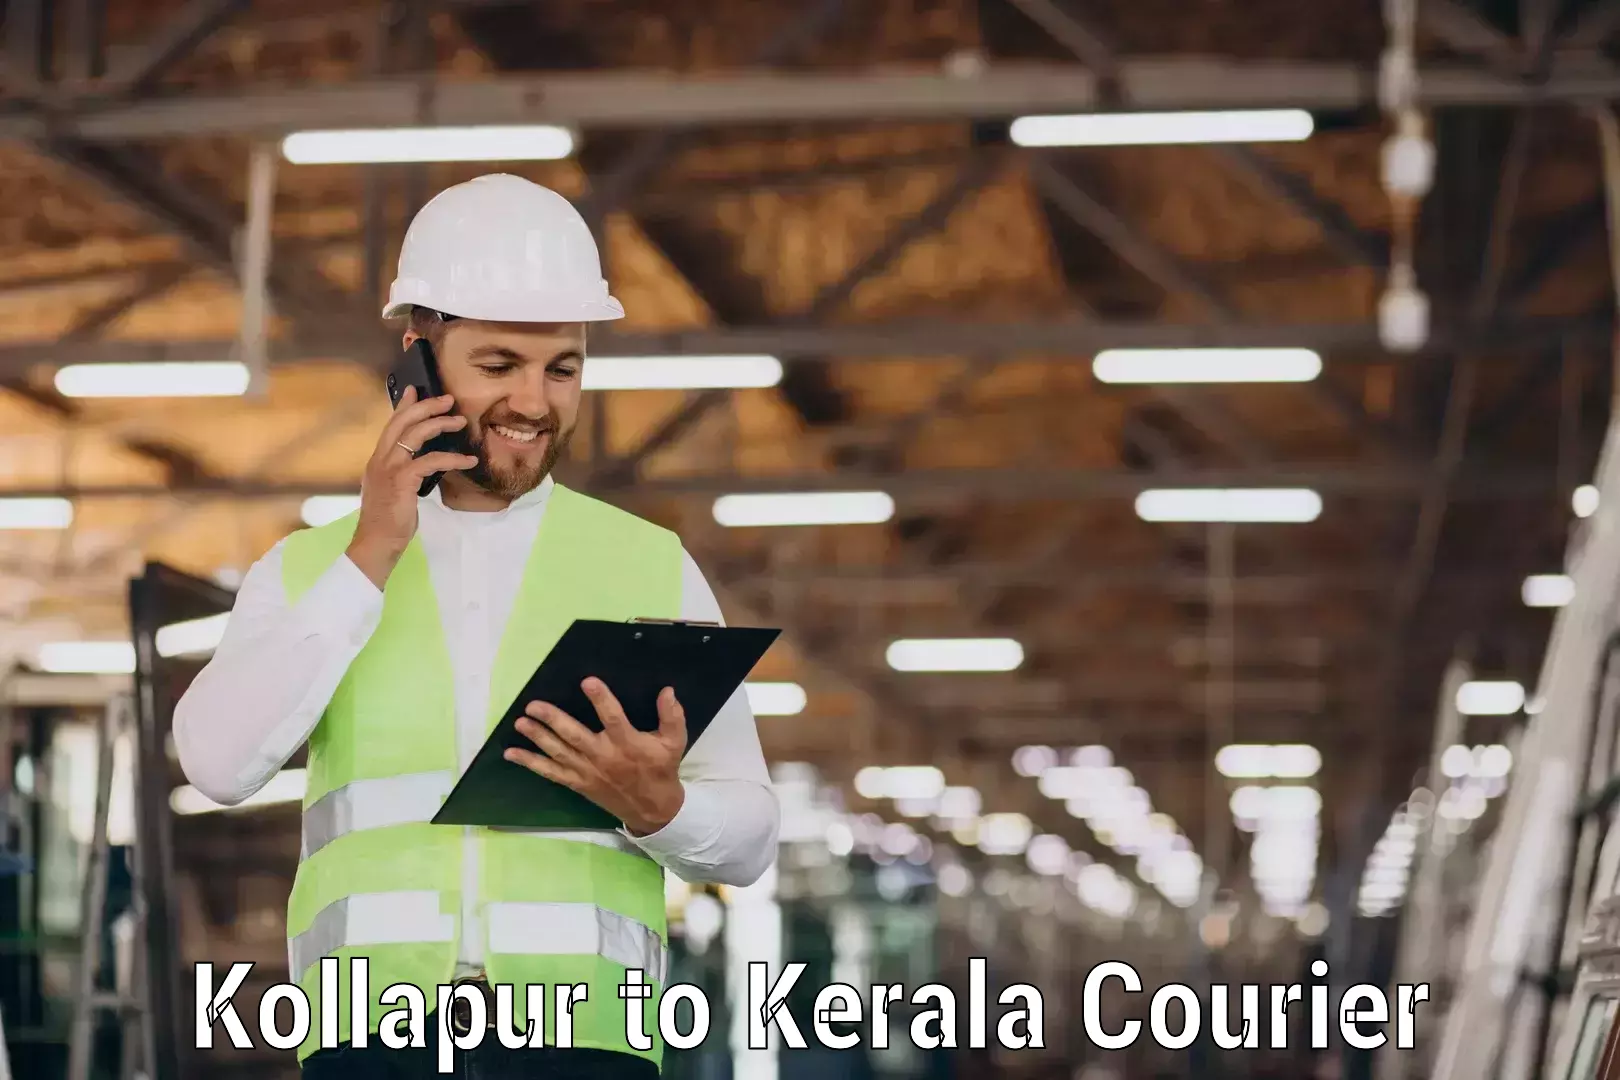 Express delivery network Kollapur to Kodungallur